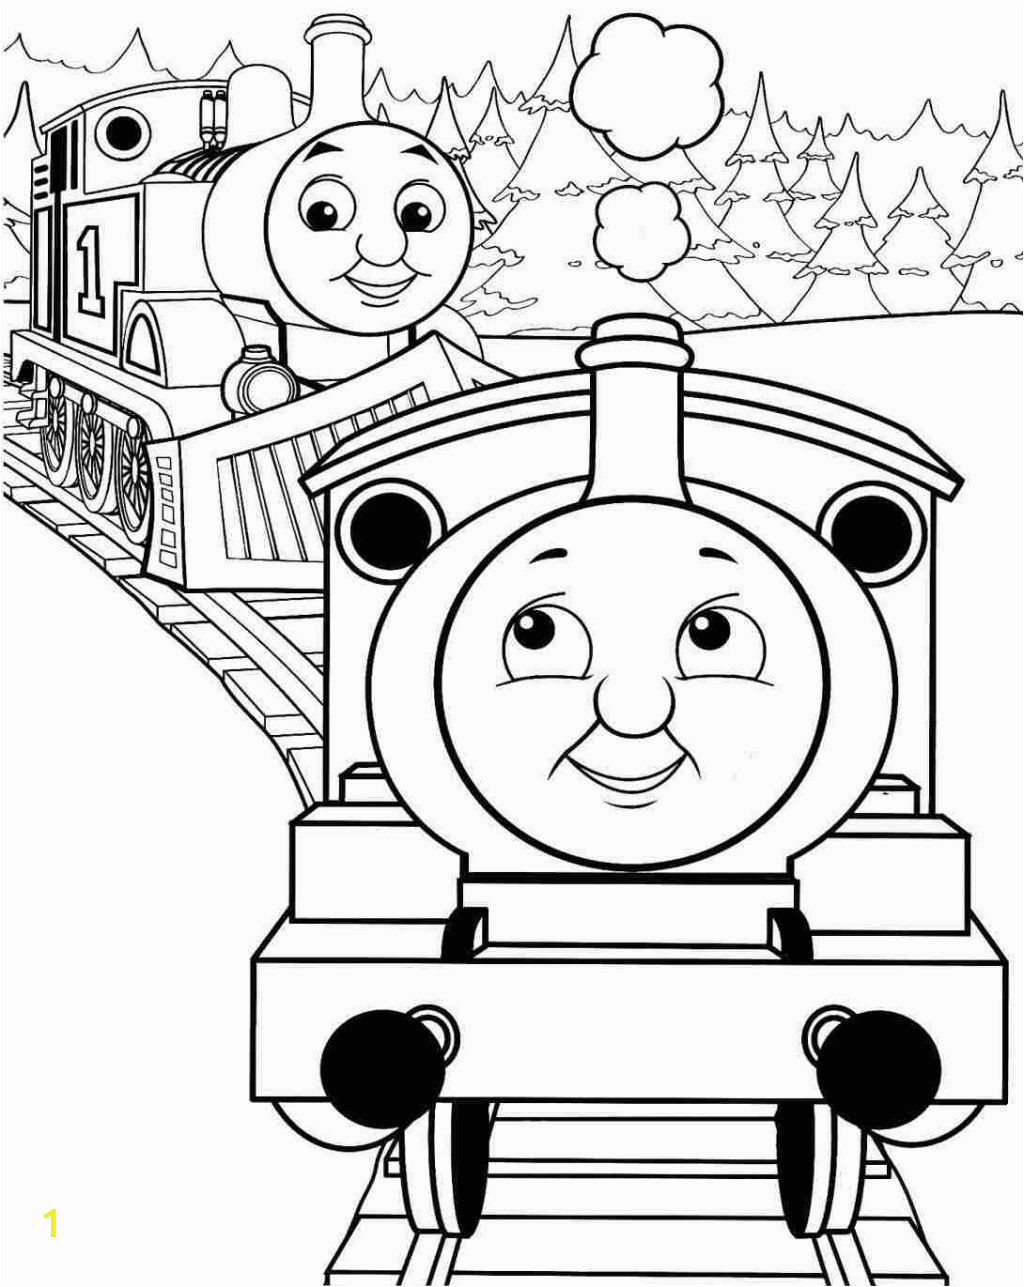 Train Coloring Pages Printable Thomas the Train Coloring Pages Idees Fluch Simple Thomas